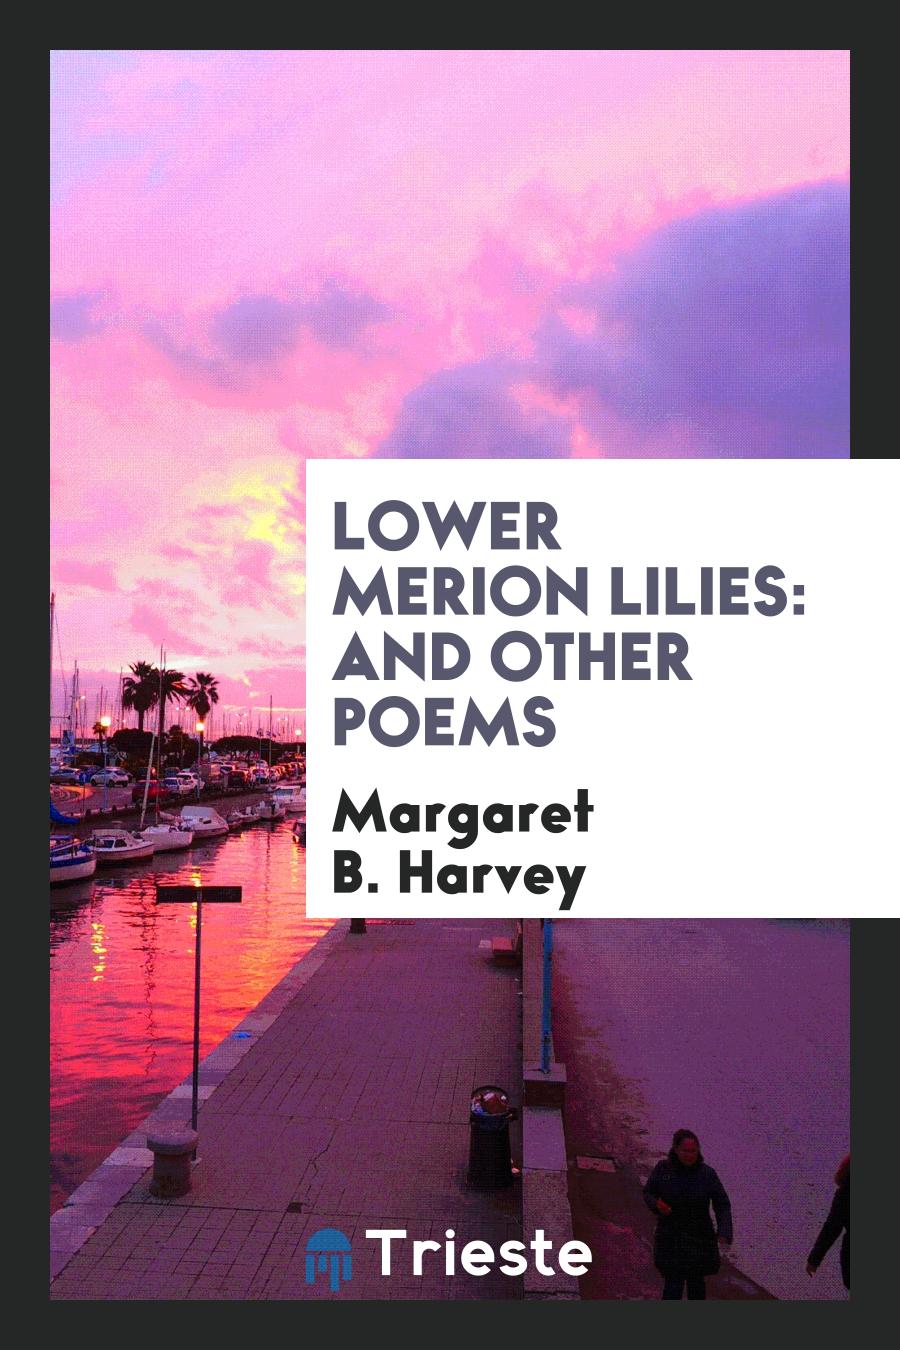 Lower Merion Lilies: And Other Poems